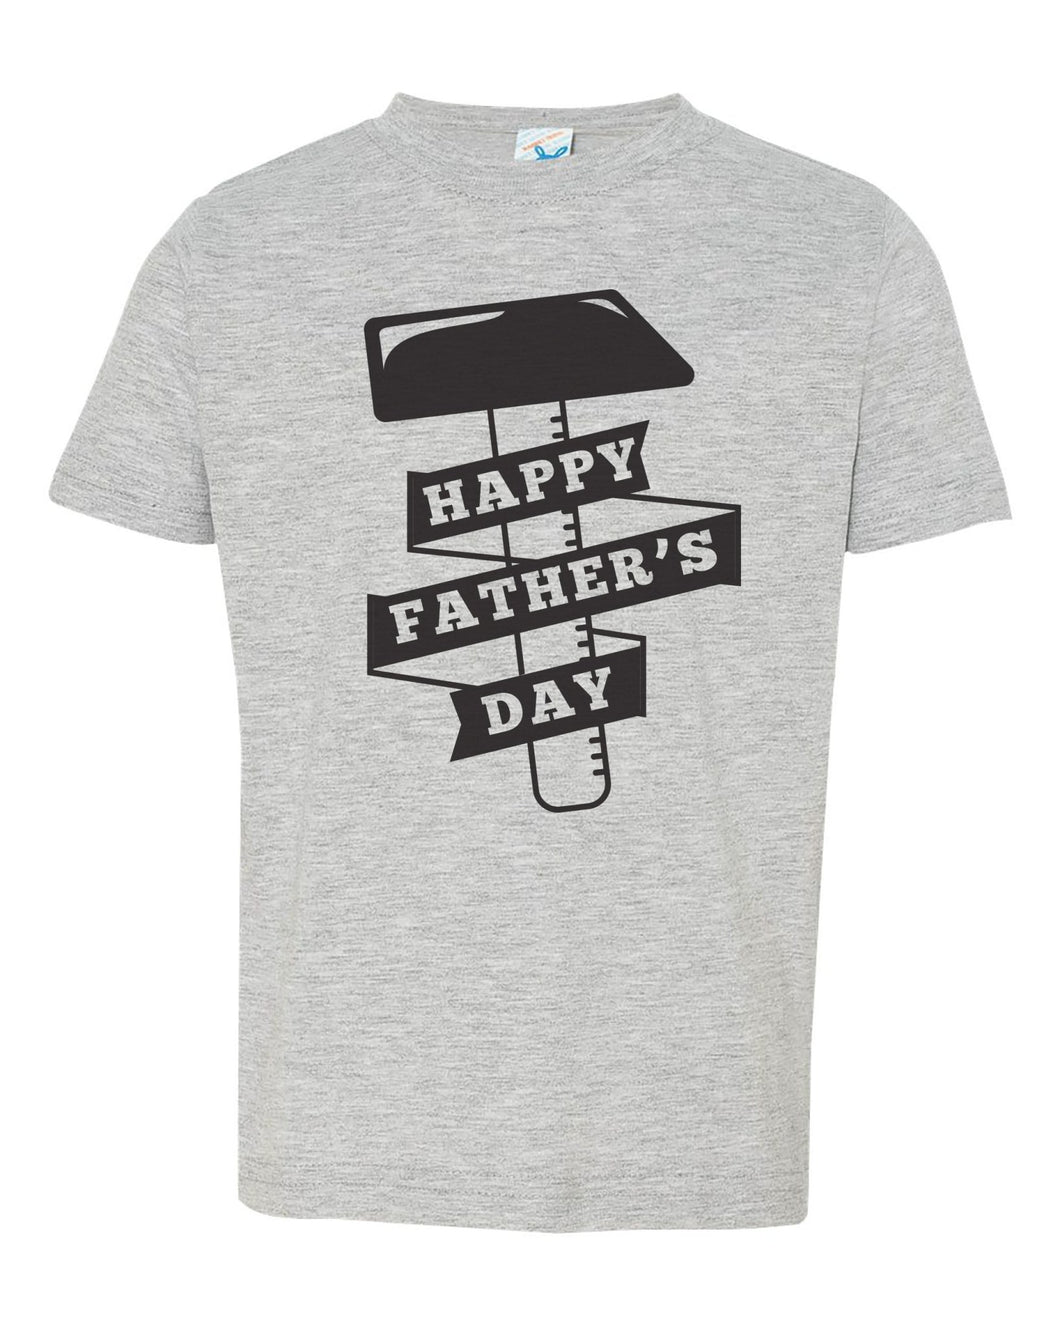 Happy Father's Day - Hammer / Youth / Toddler Crew Neck - Baffle